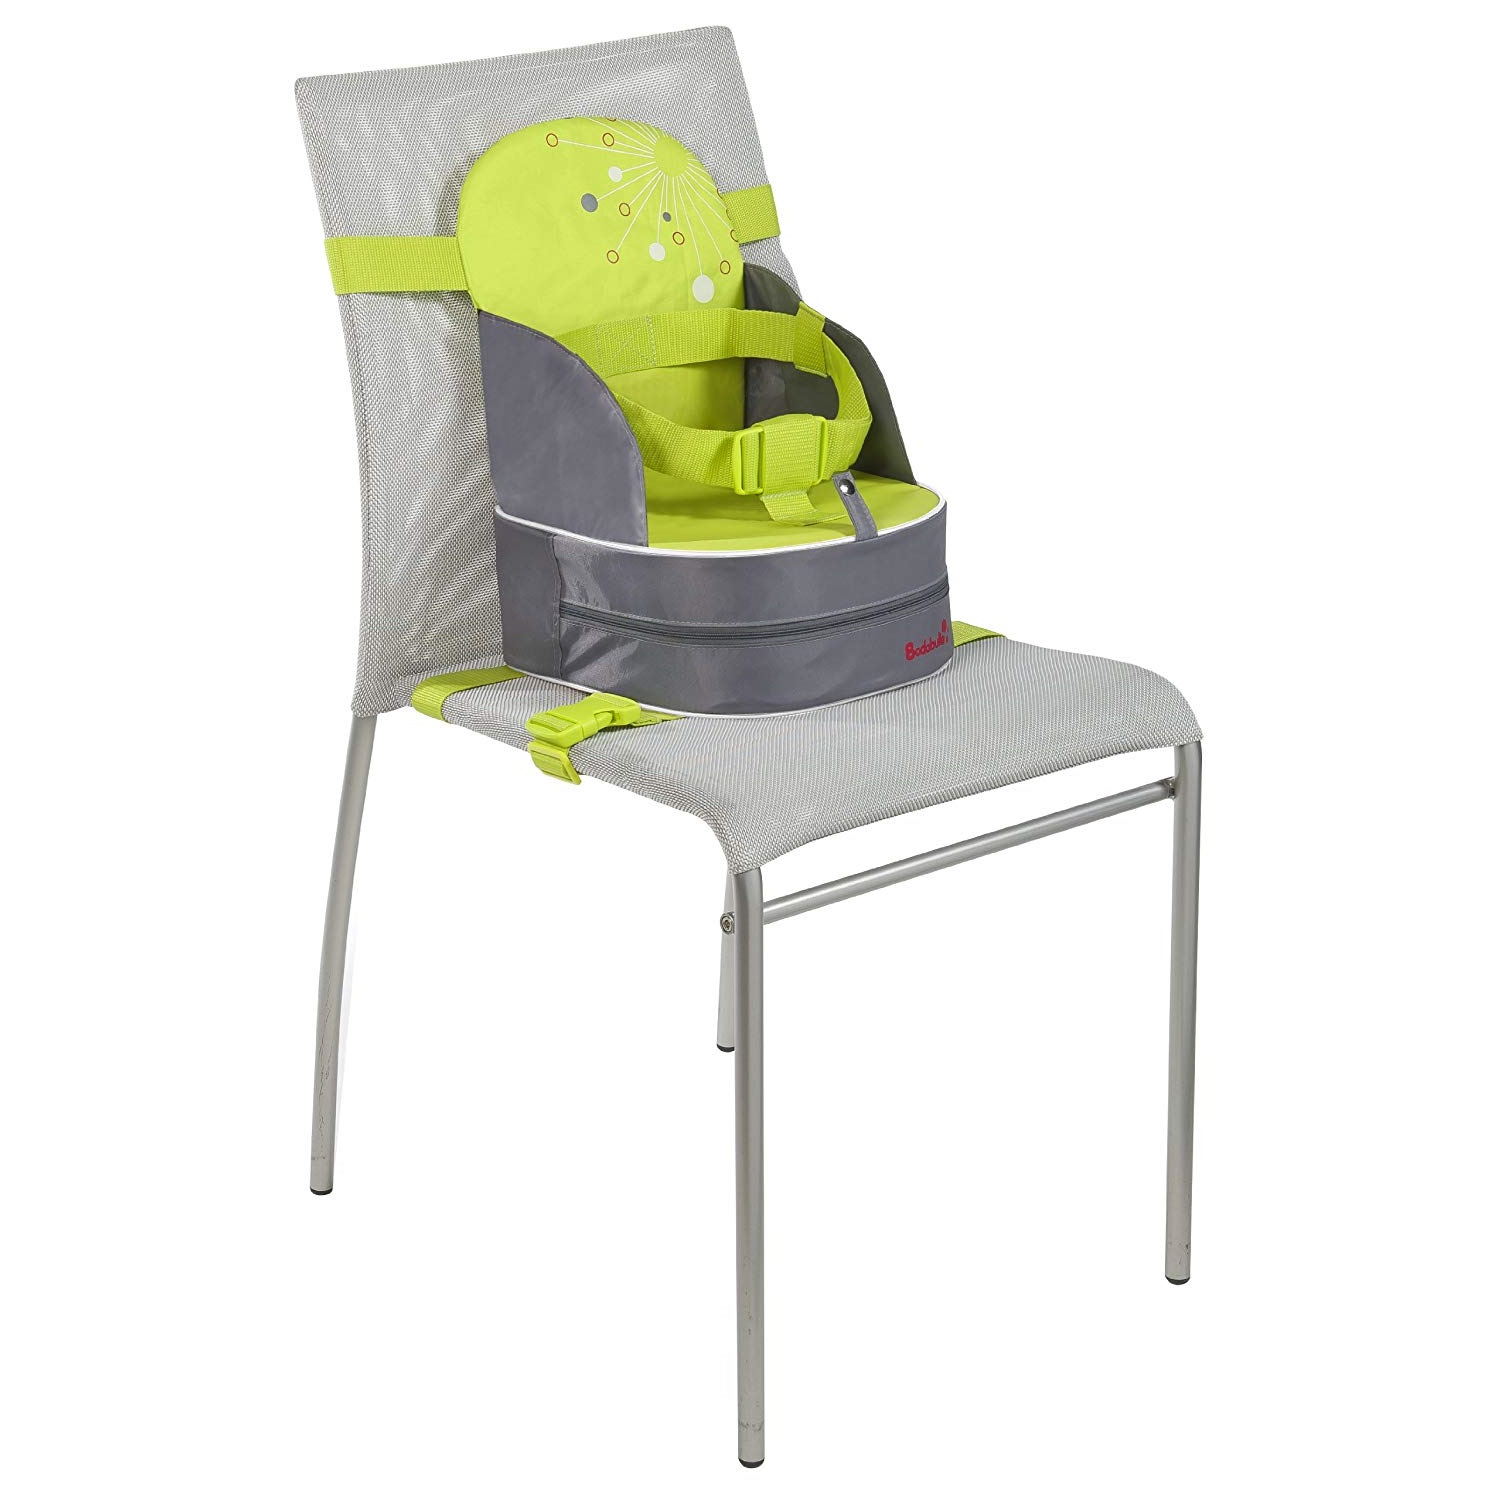 Nomad Baby Booster Seat For Eating Nursery Lilobebe